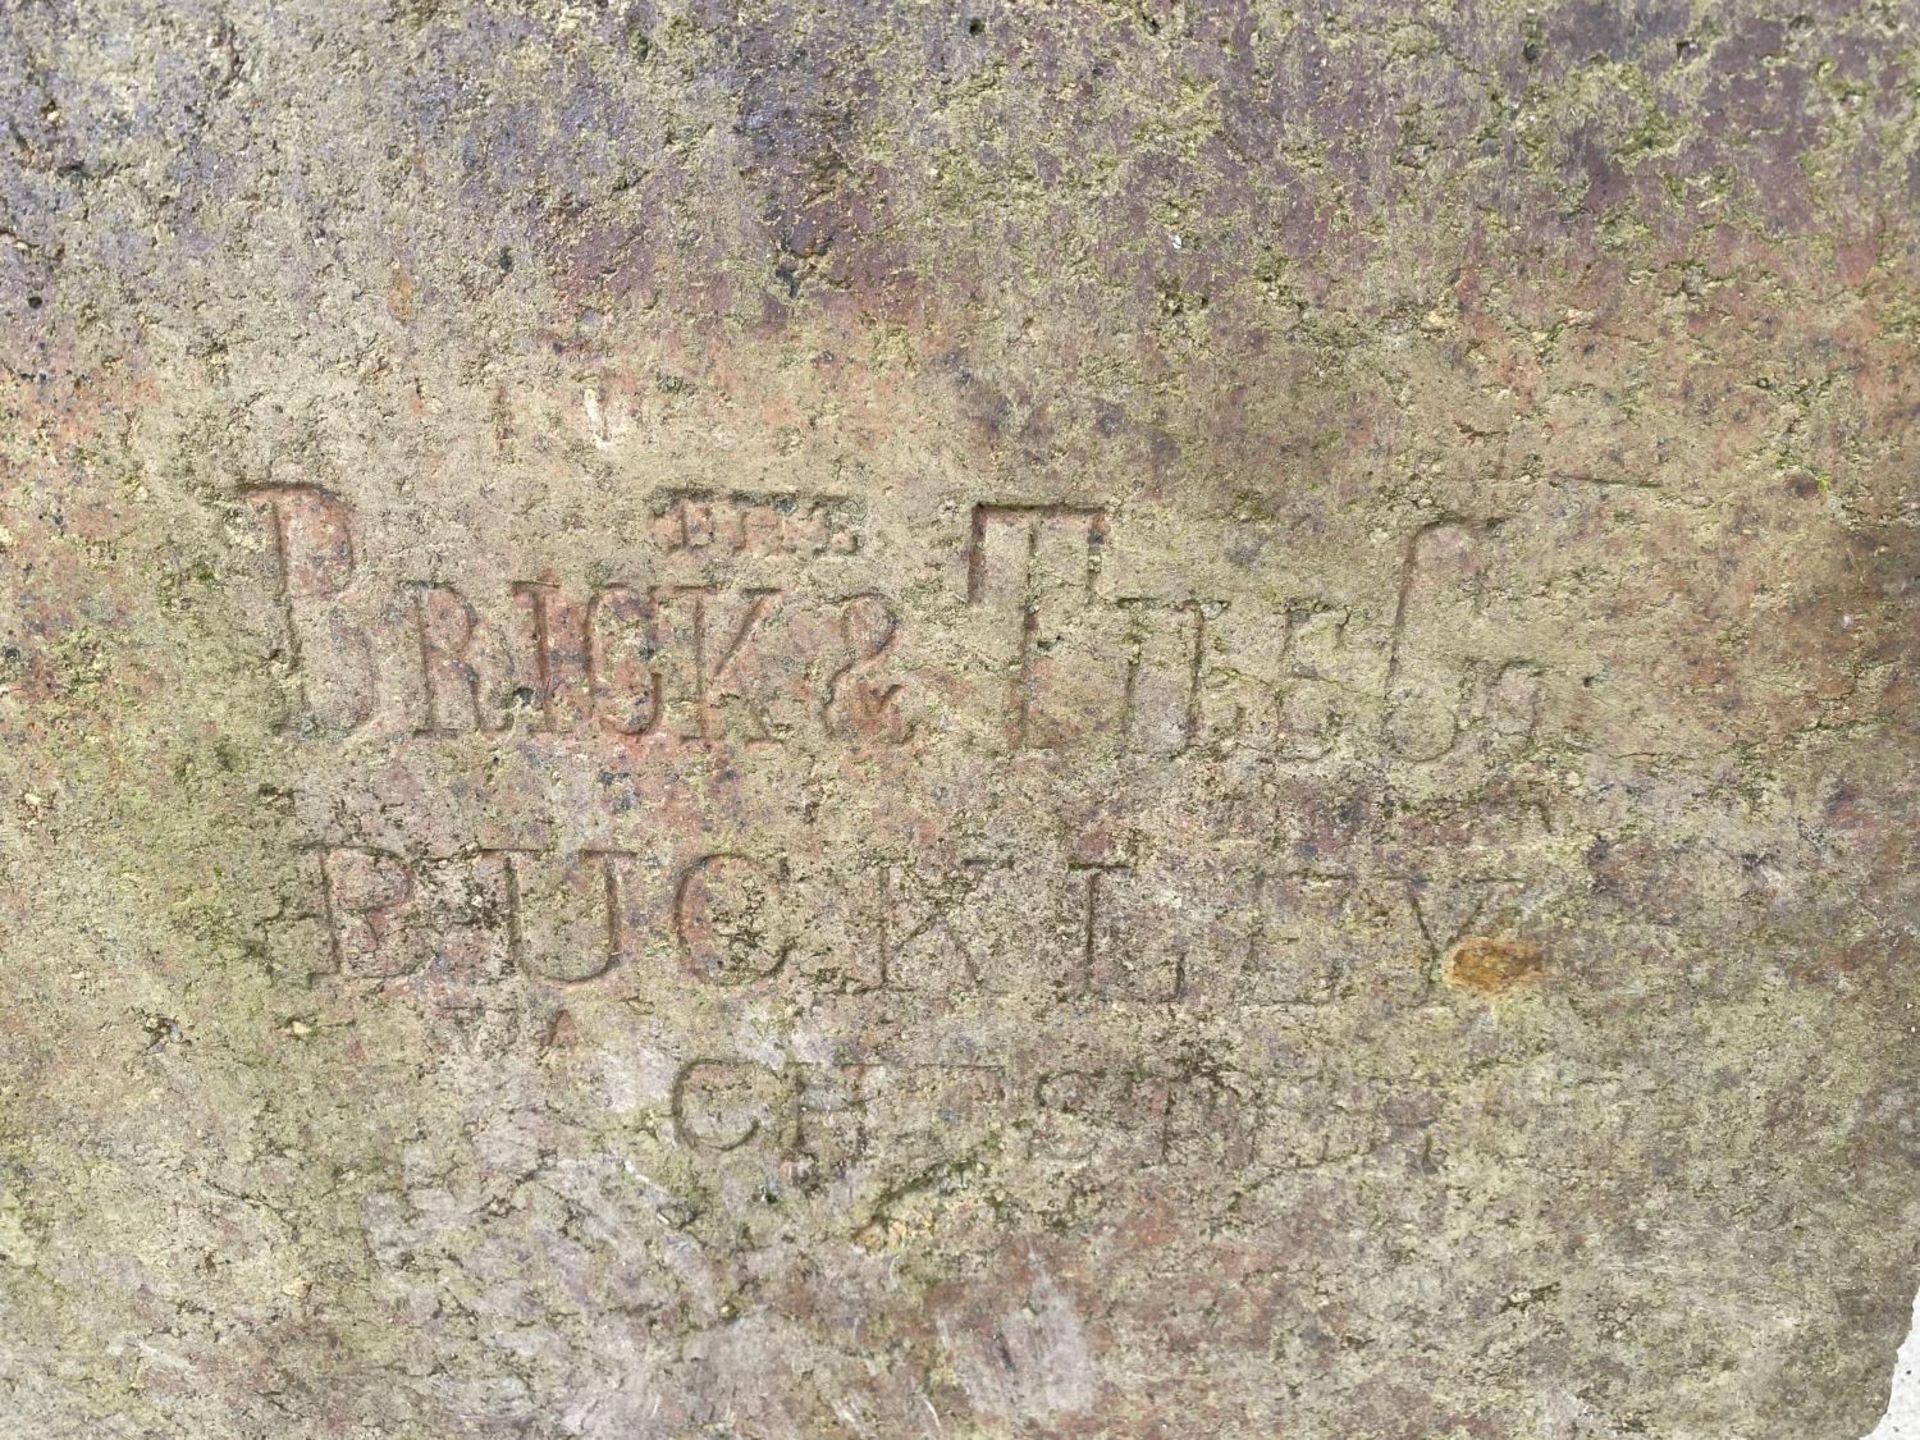 A PIECE OF STONE, ENGRAVED 'THE BRICK AND TILE CO. BUCKLEY CHESTER' - Image 2 of 3